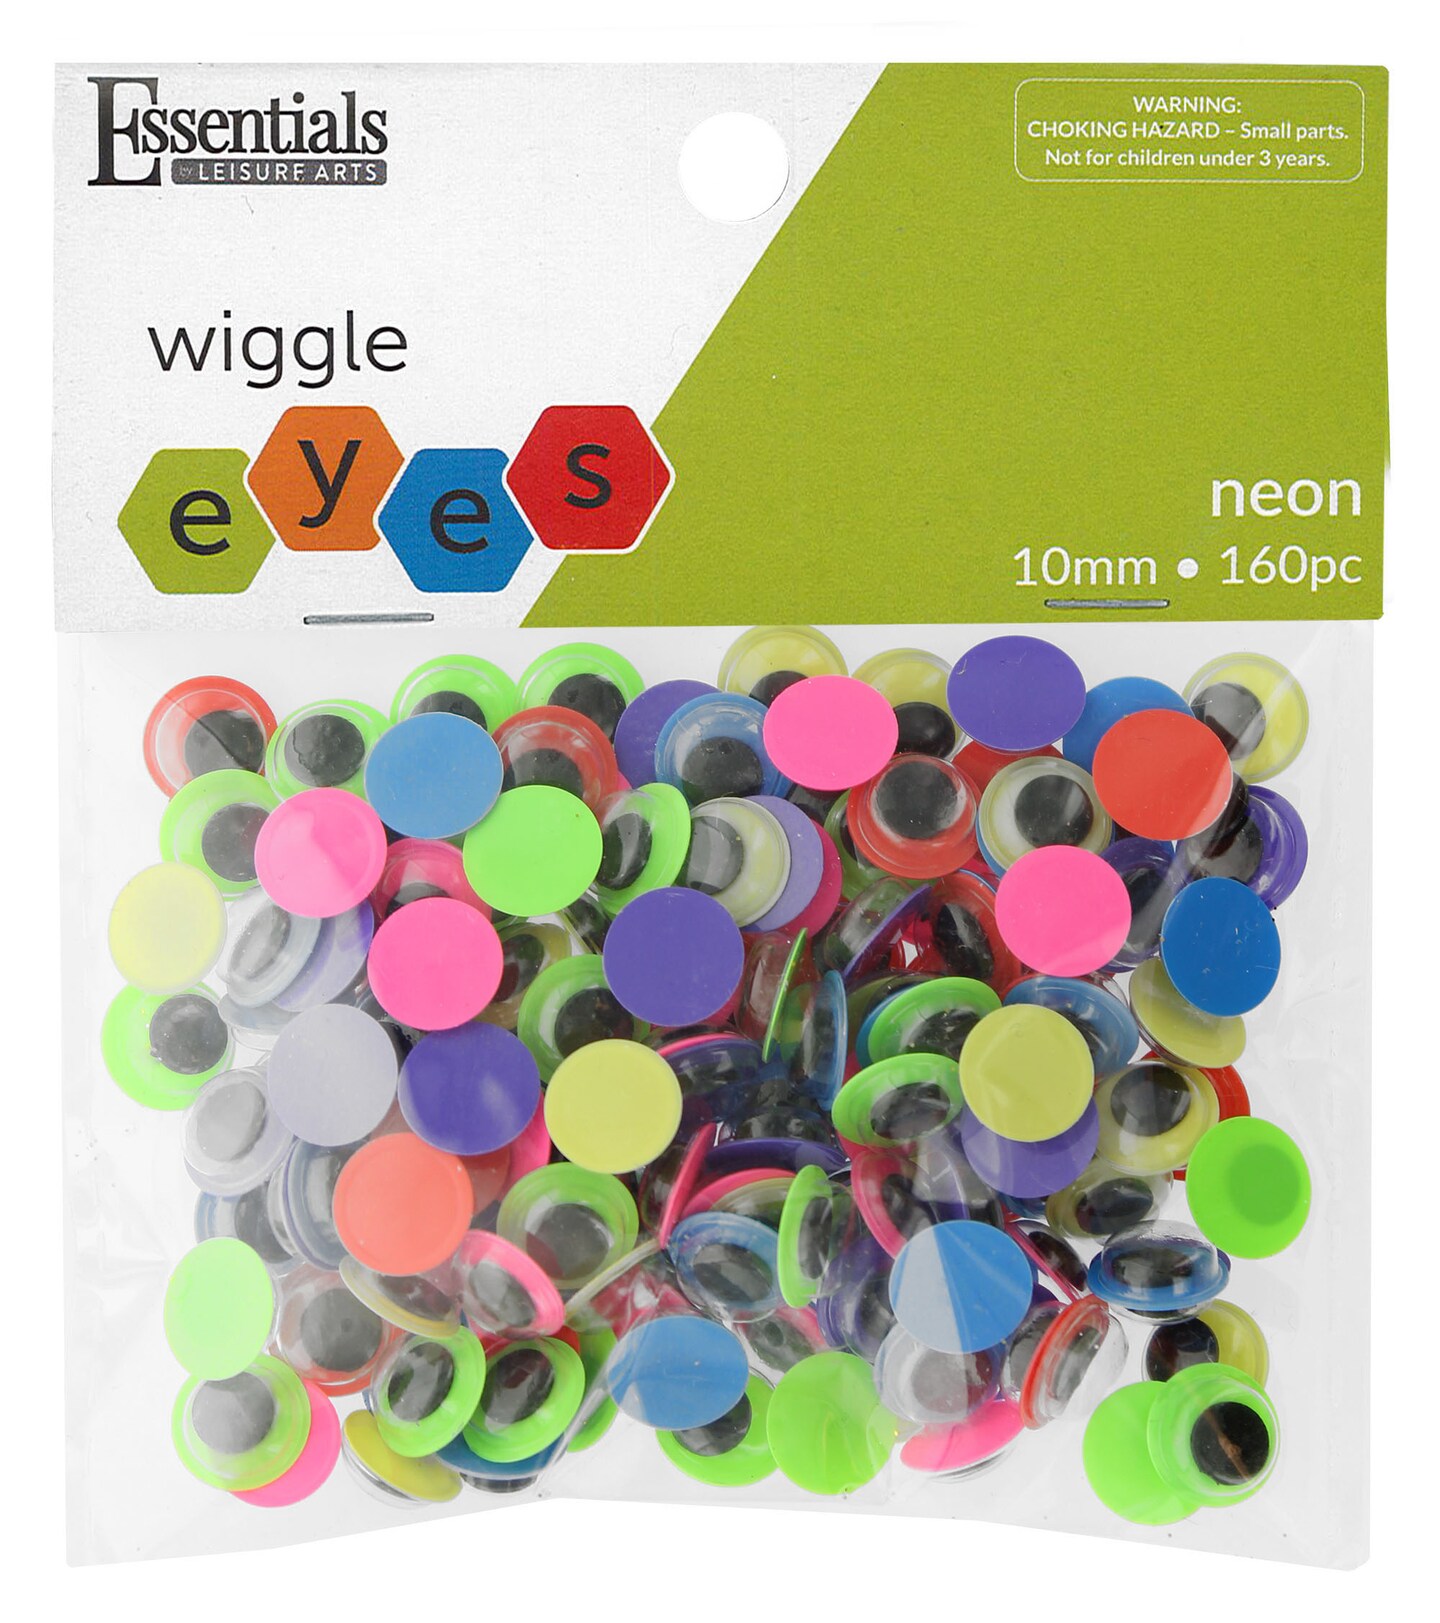 Essentials by Leisure Arts Eyes Paste On Moveable 10mm Neon 160pc Googly Eyes, Google Eyes for Crafts, Big Googly Eyes for Crafts, Wiggle Eyes, Craft Eyes